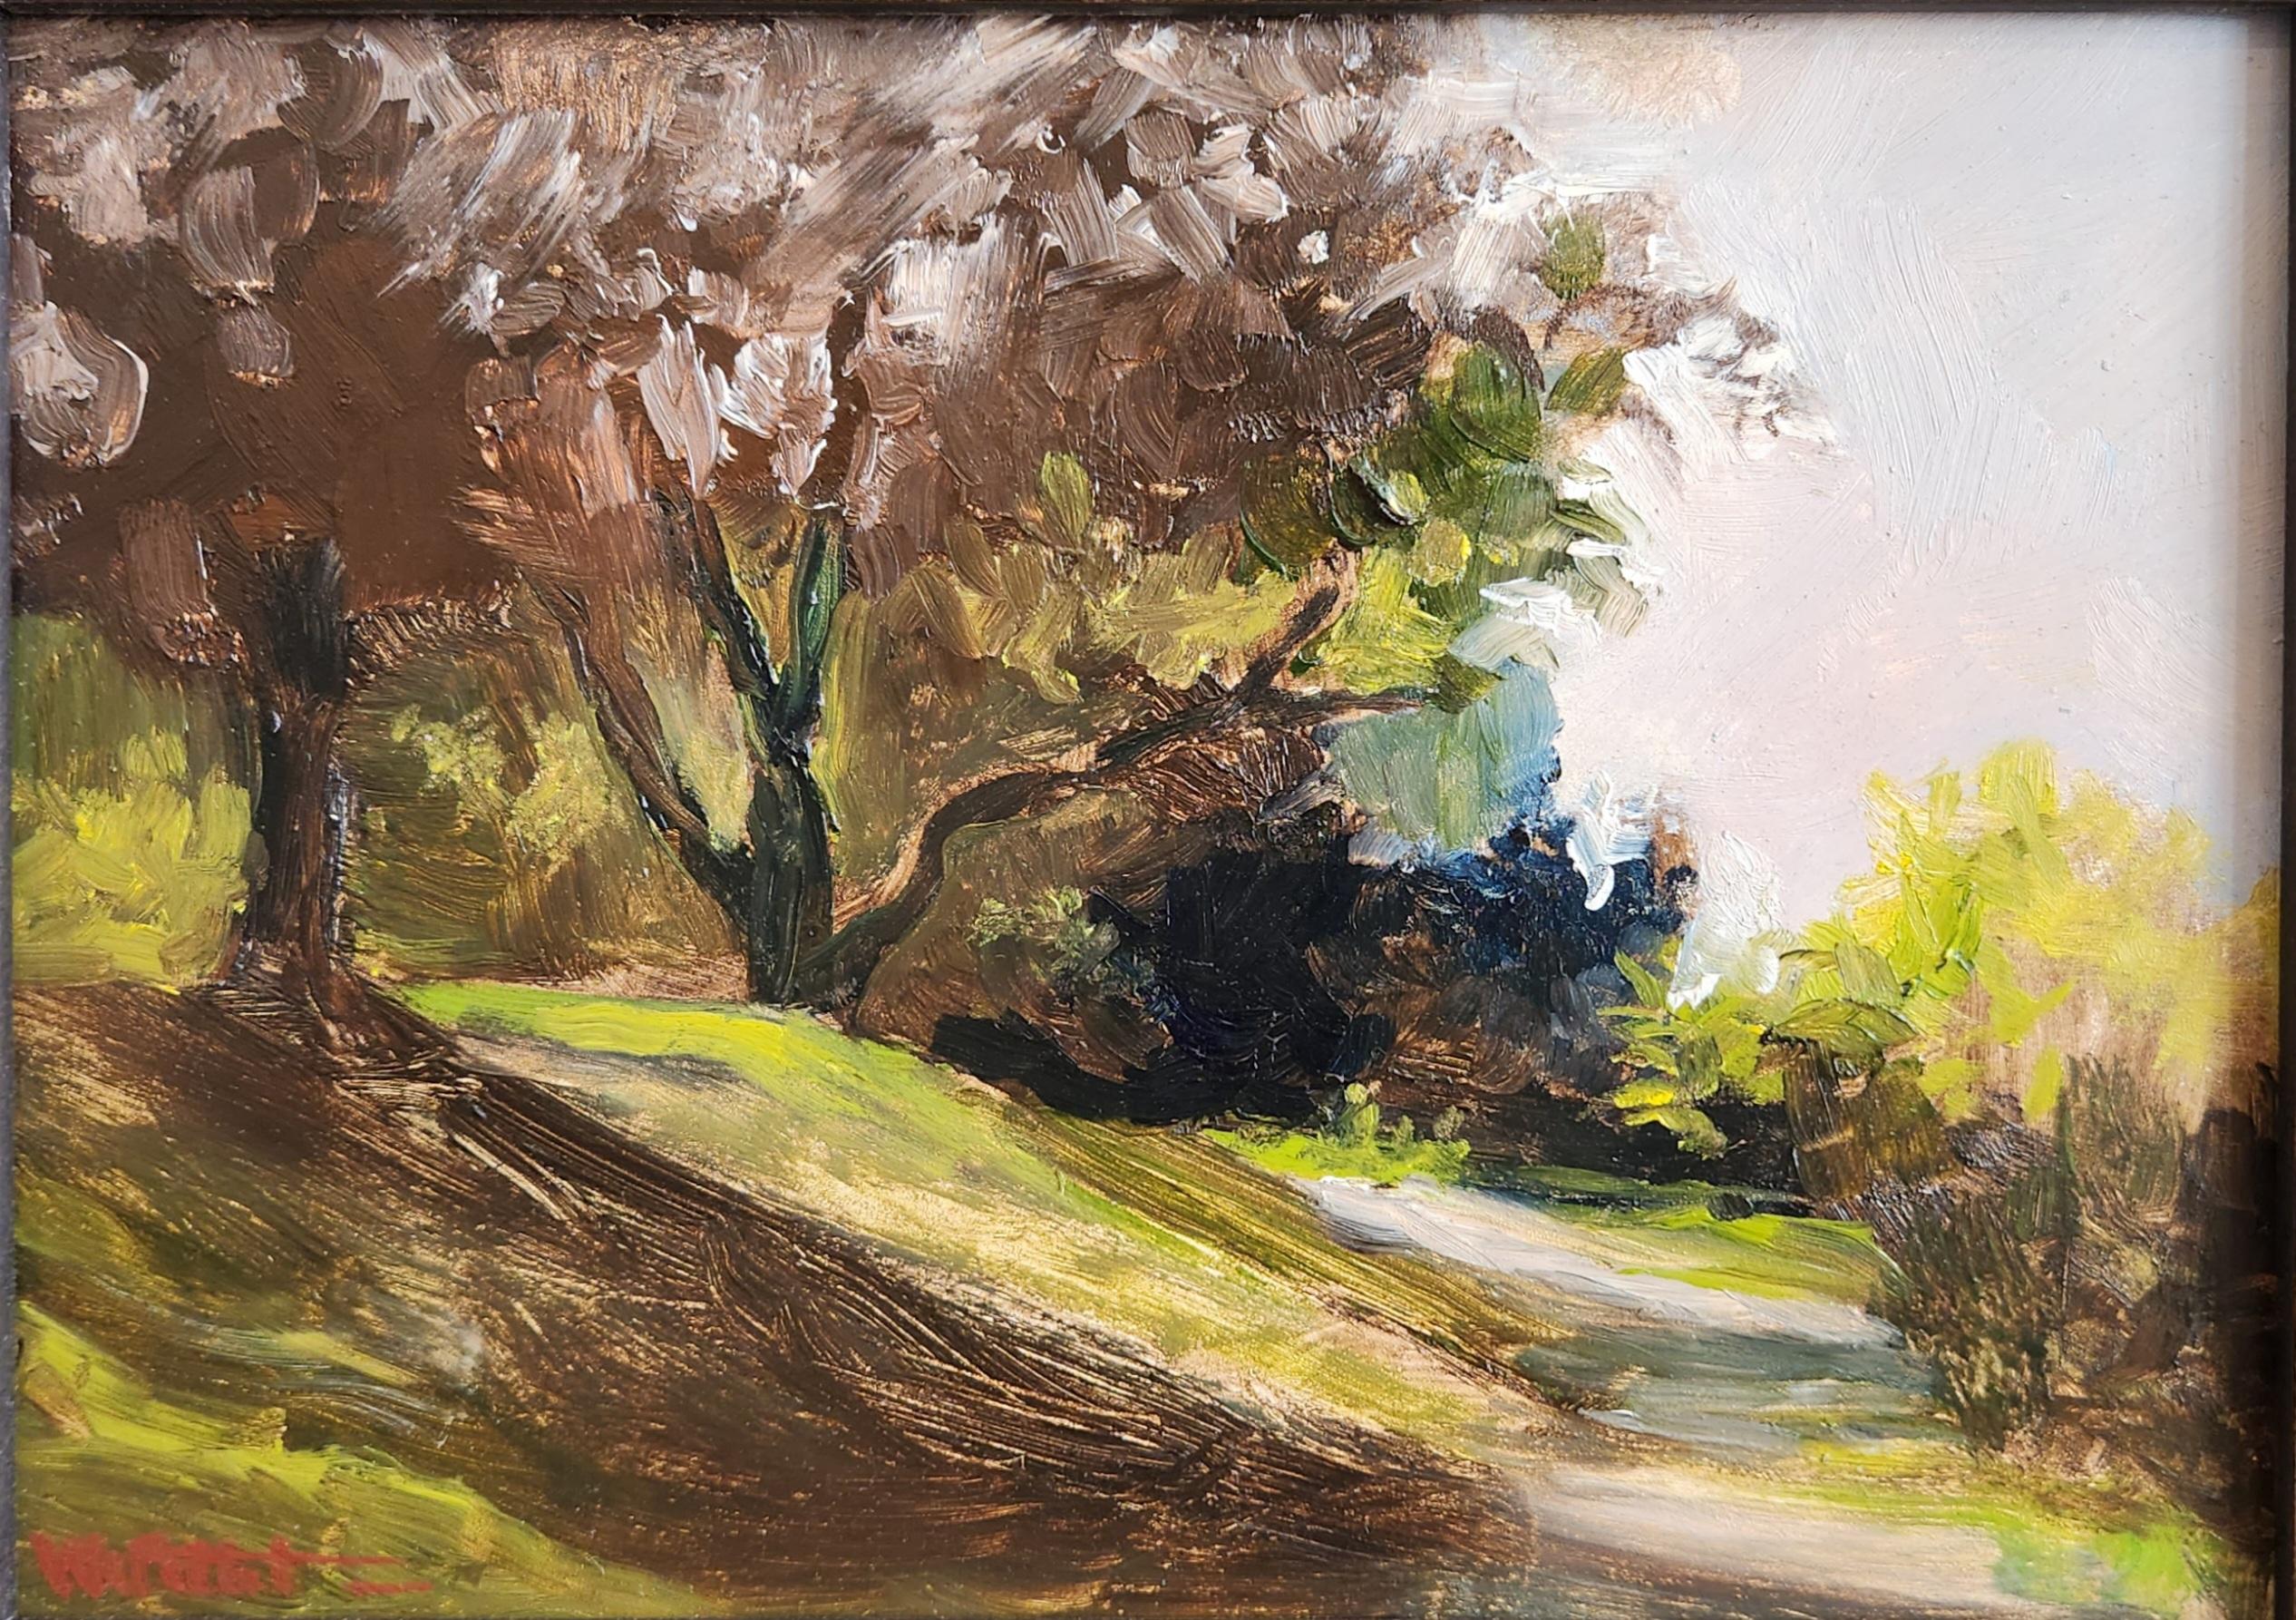 This oil on canvas painting shows a beautiful scene of Washington Park in Albany, NY, designed by the famous Frederick Olmsted. The bright greens of sunlit grass cut through deep brown shadows made by the trees. Light pink and beige leaves create a